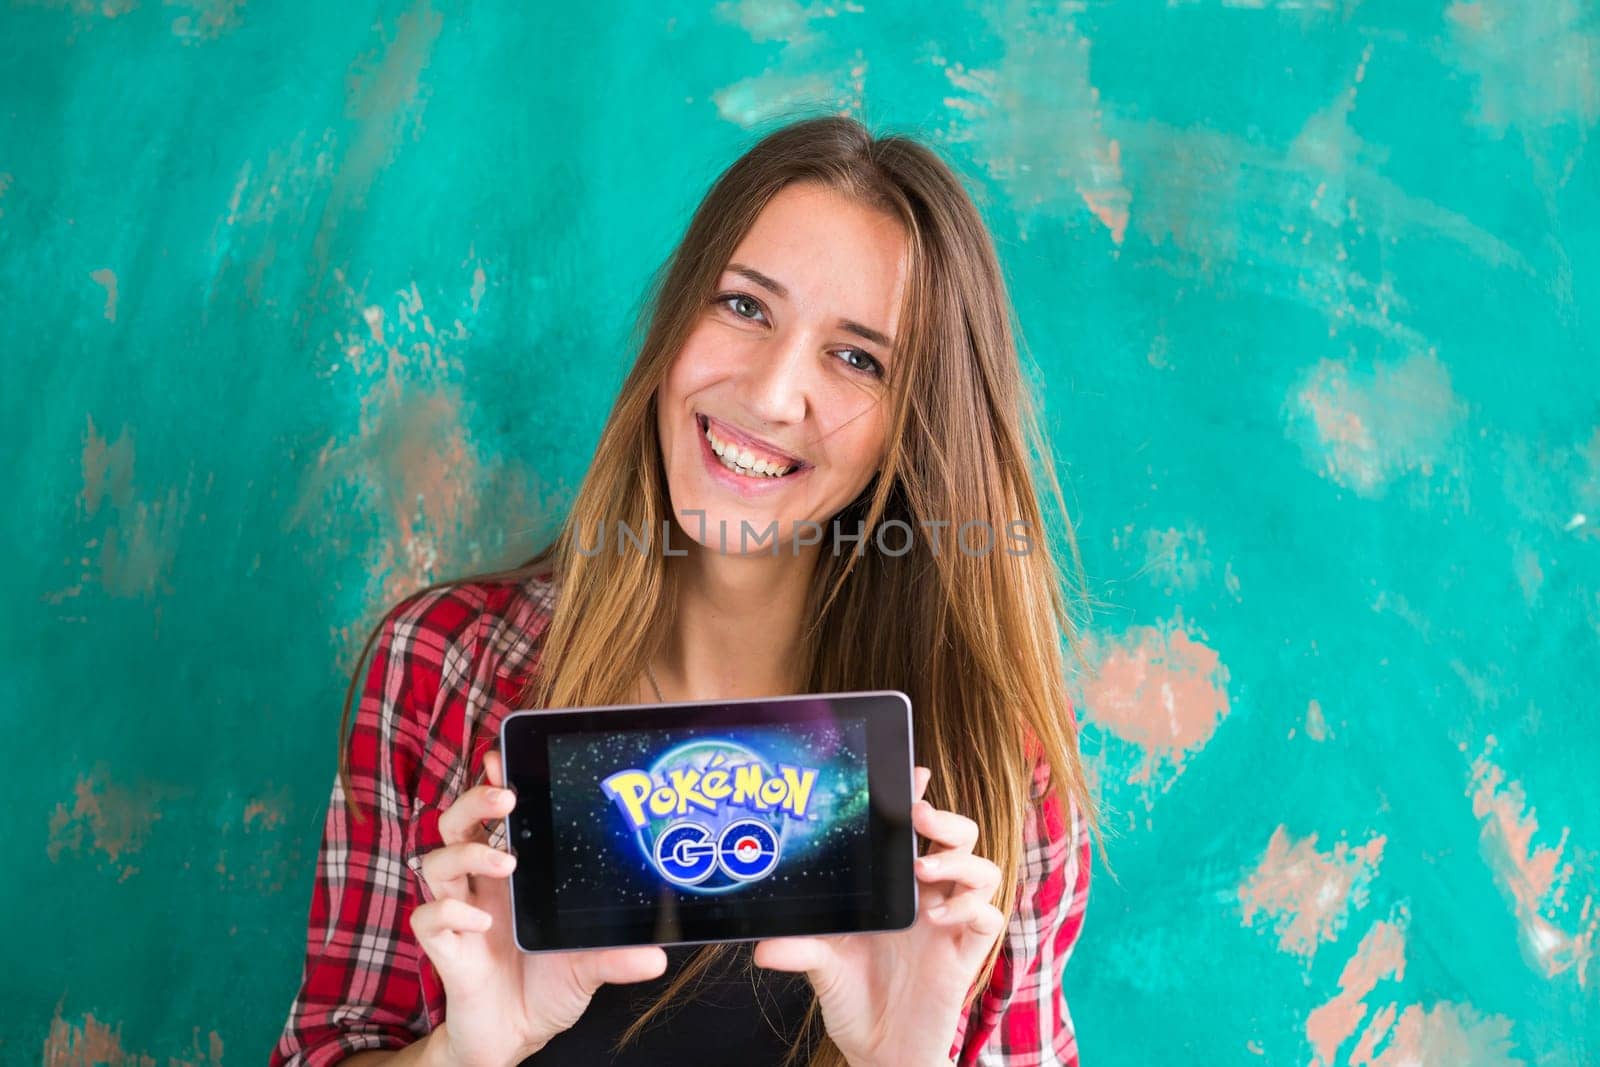 Ufa, Russia. - July 29: Woman show the tablet with Pokemon Go logo by Satura86